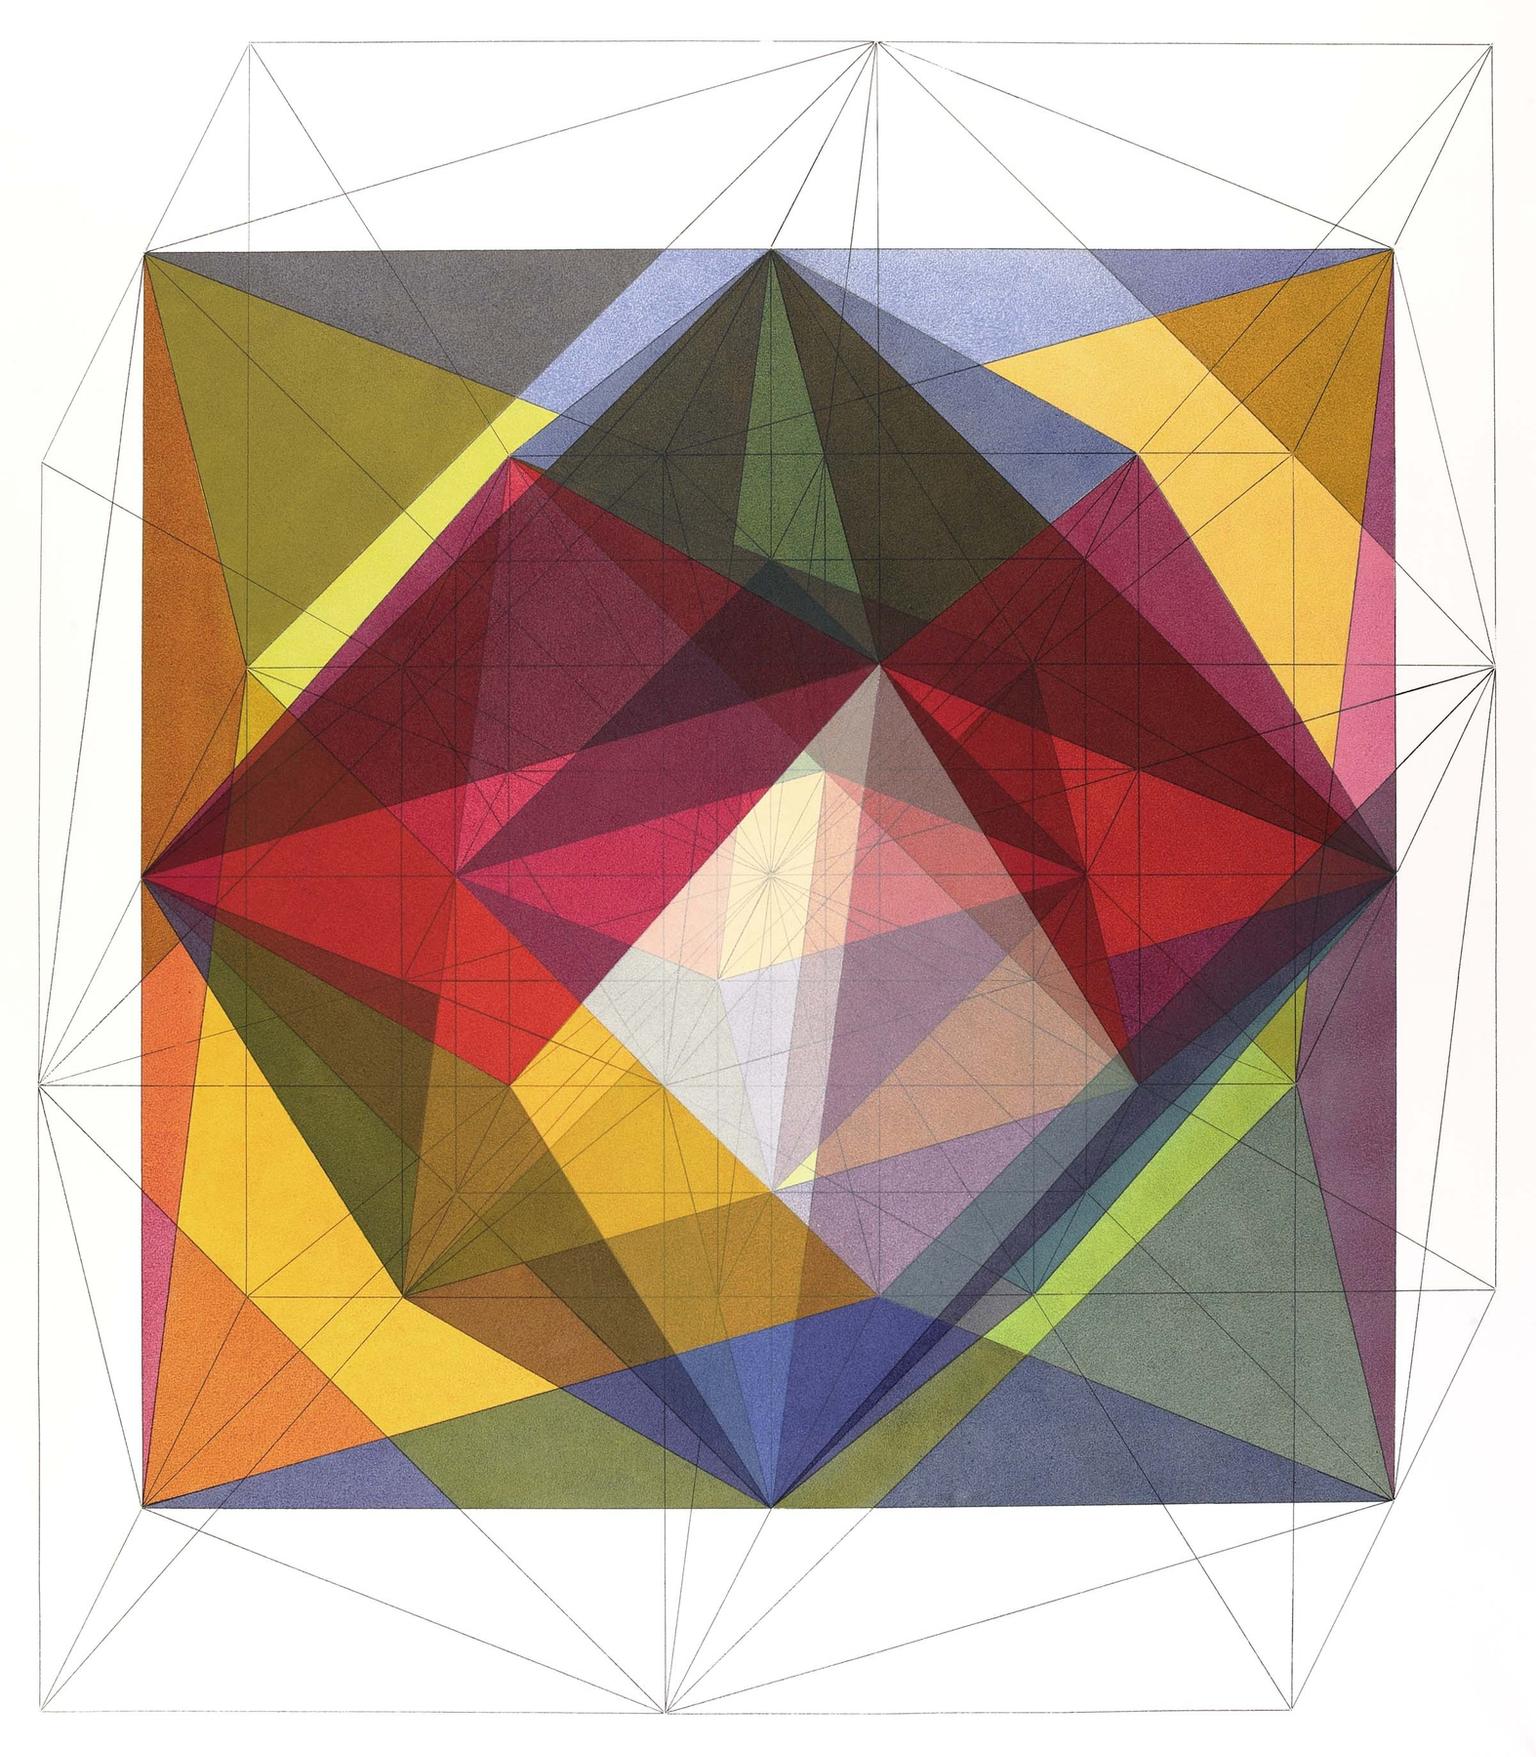 Image for entry 'Chrome 163 CUBOCTAHEDRON, DUO-TETRAHEDRON, RHOMBIC DODECAHEDRON, OCTAHEDRON 1, TETRAHEDRON, OCTAHEDRON 2.'